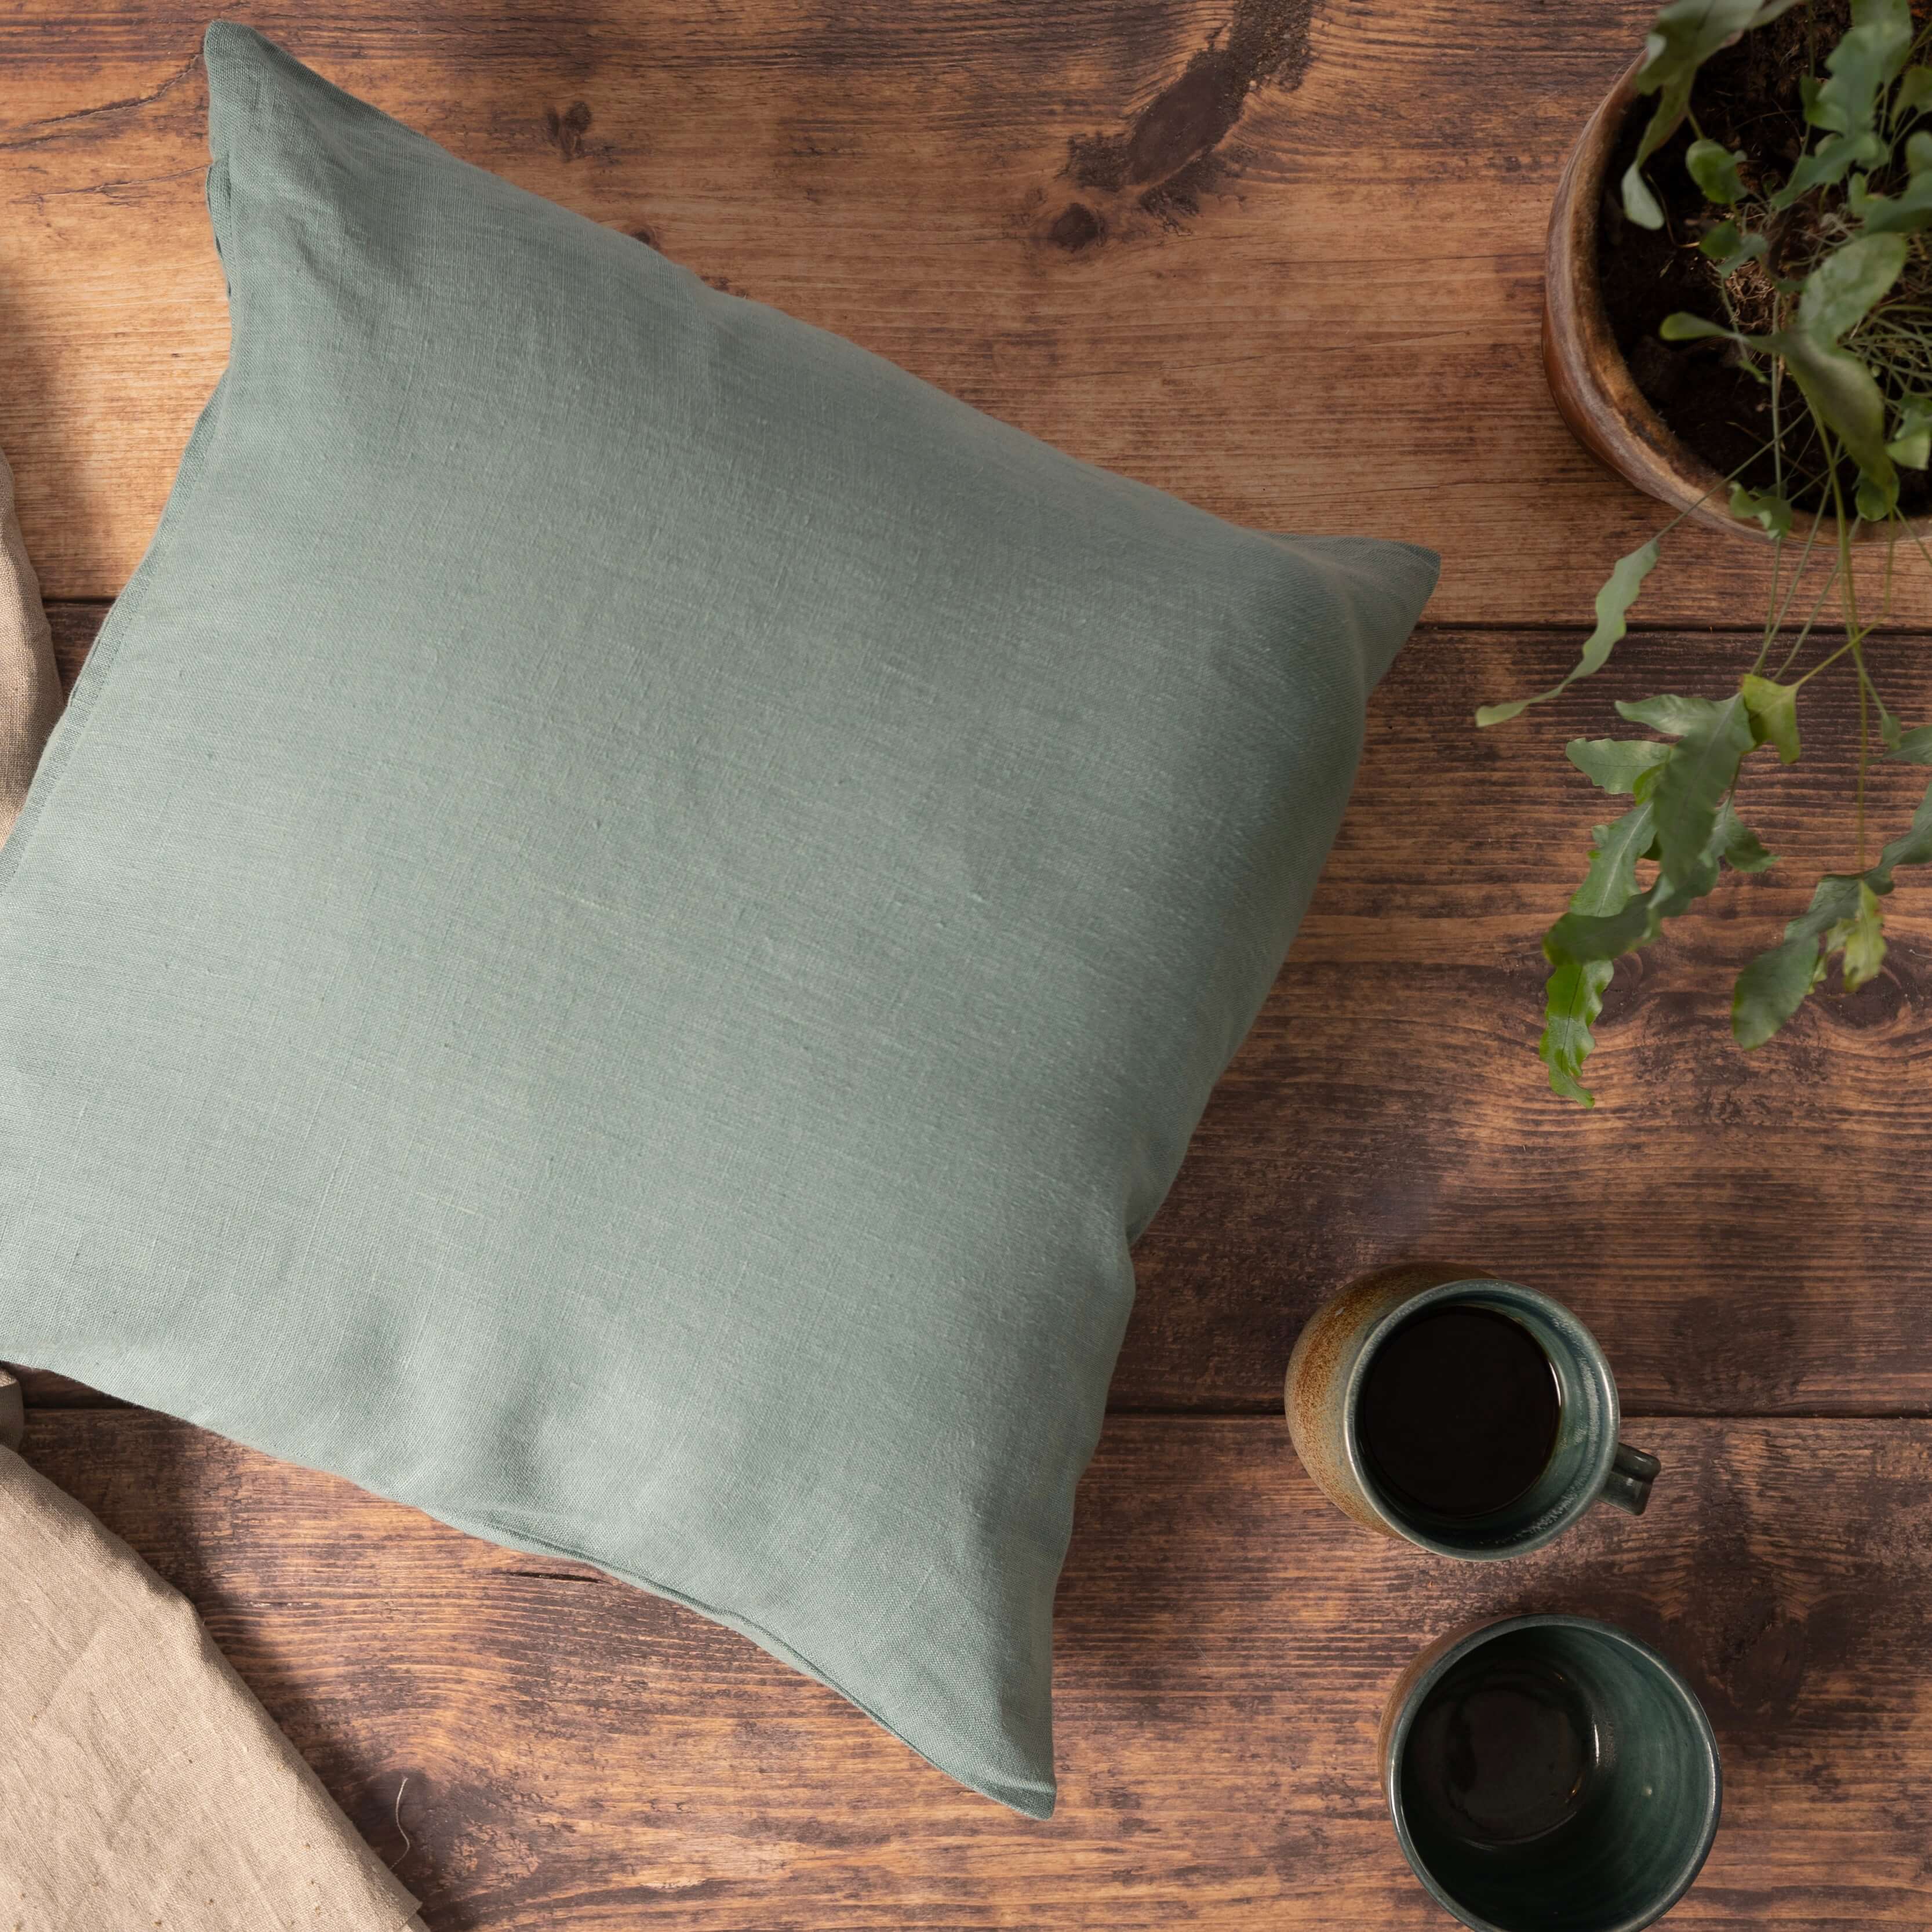 Dusty turquoise linen cushion cover on wooden table with cup of coffee and house plant